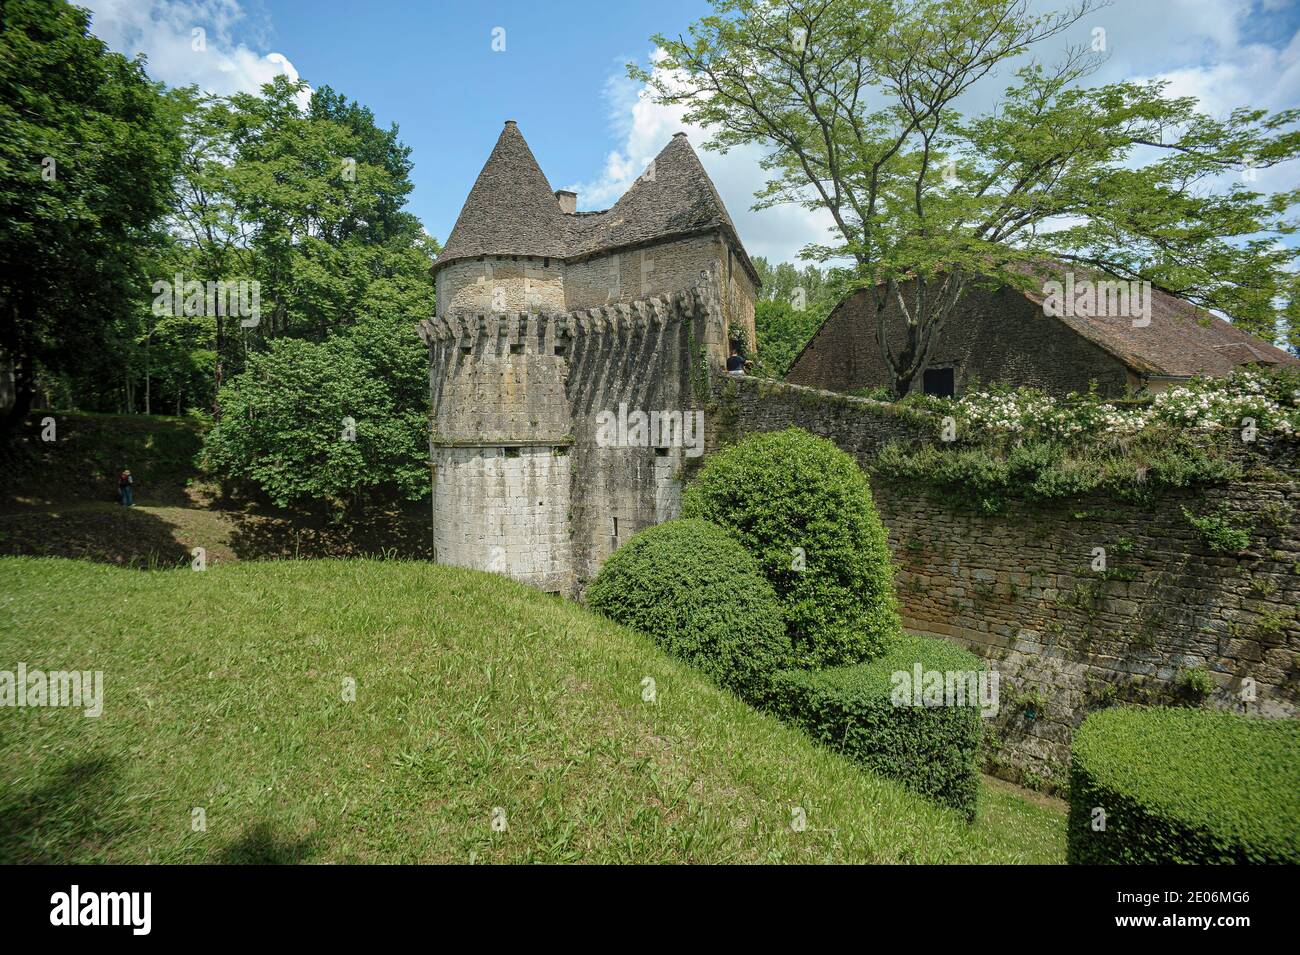 Fortified farmhouse in the Perigord region, France - This old fortified farmhouse is surrounded by ramparts with a corner tower. Stock Photo